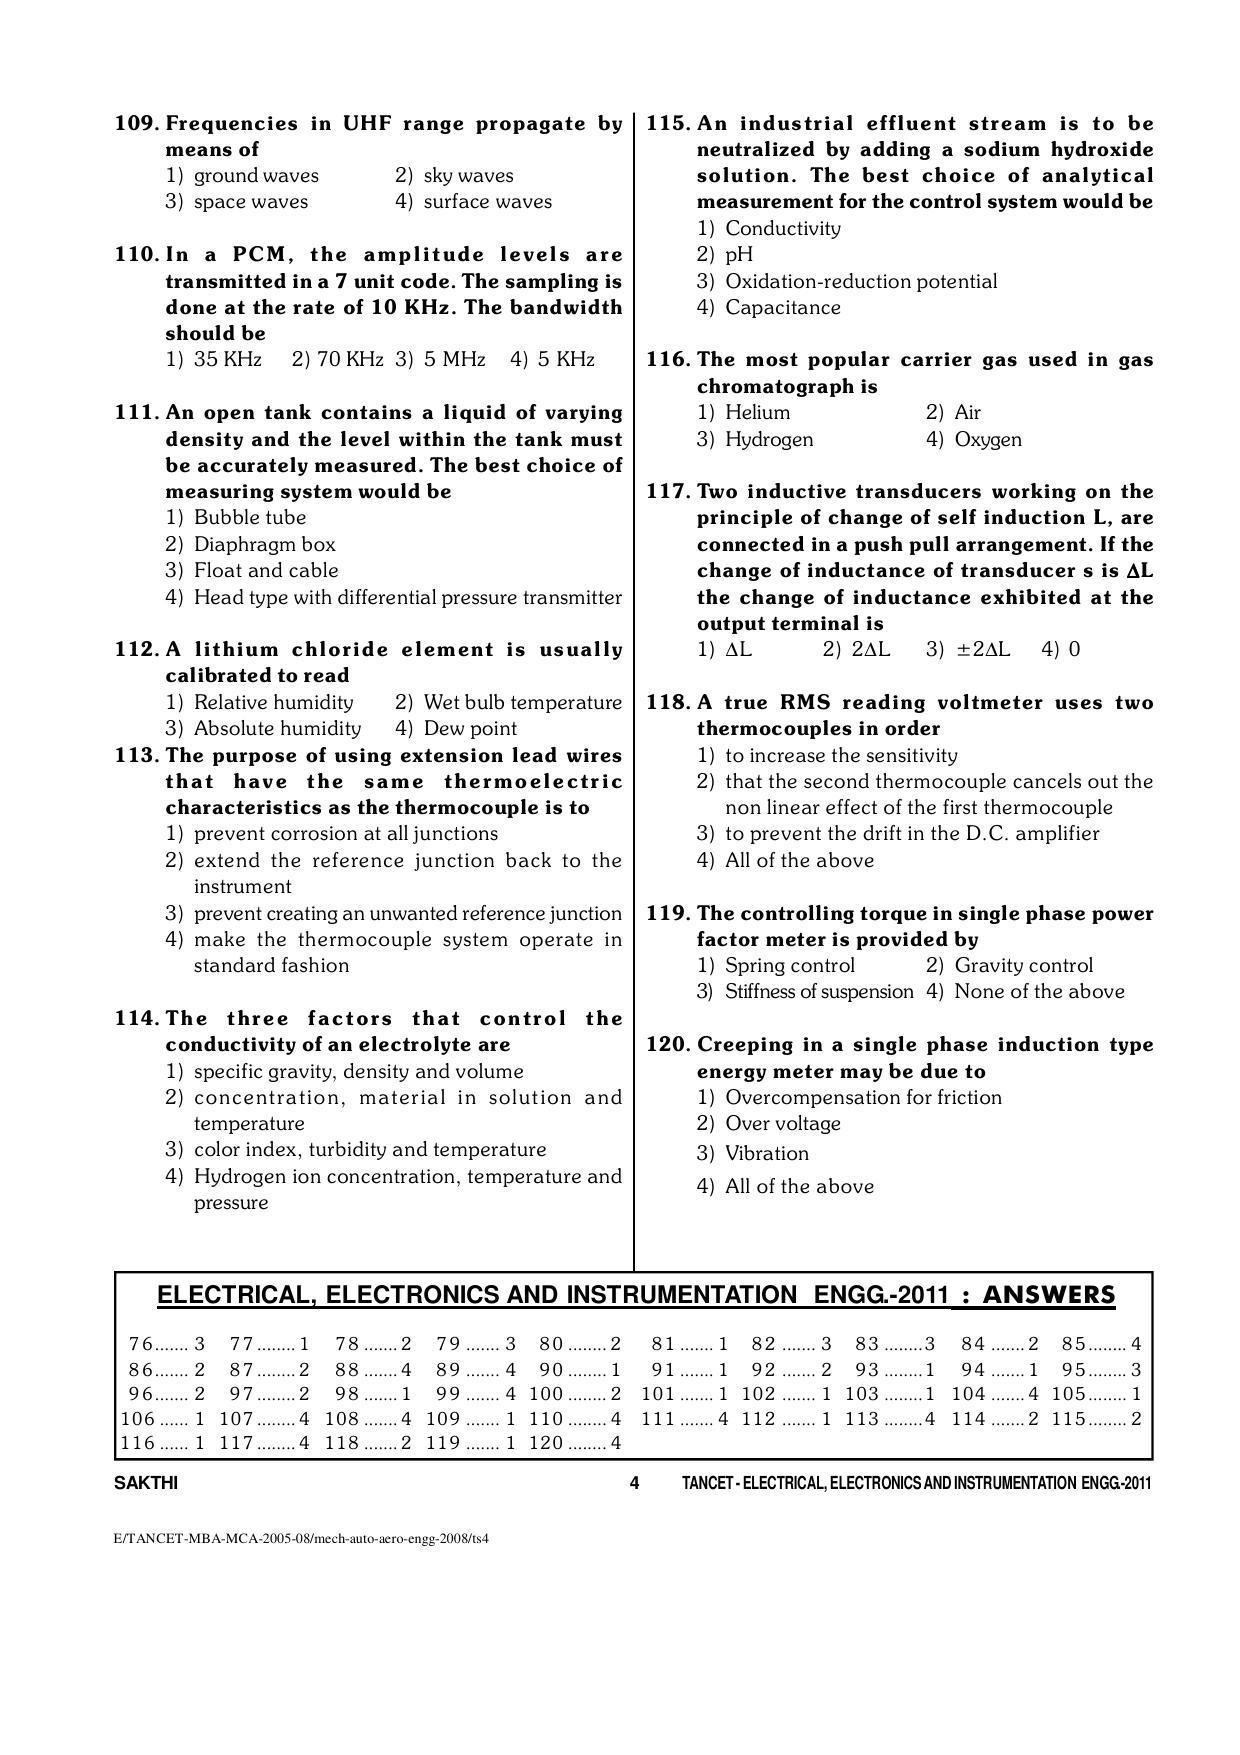 TANCET Electrical, Electronics and Instrumentation Engineering Question Papers 2011 - Page 4